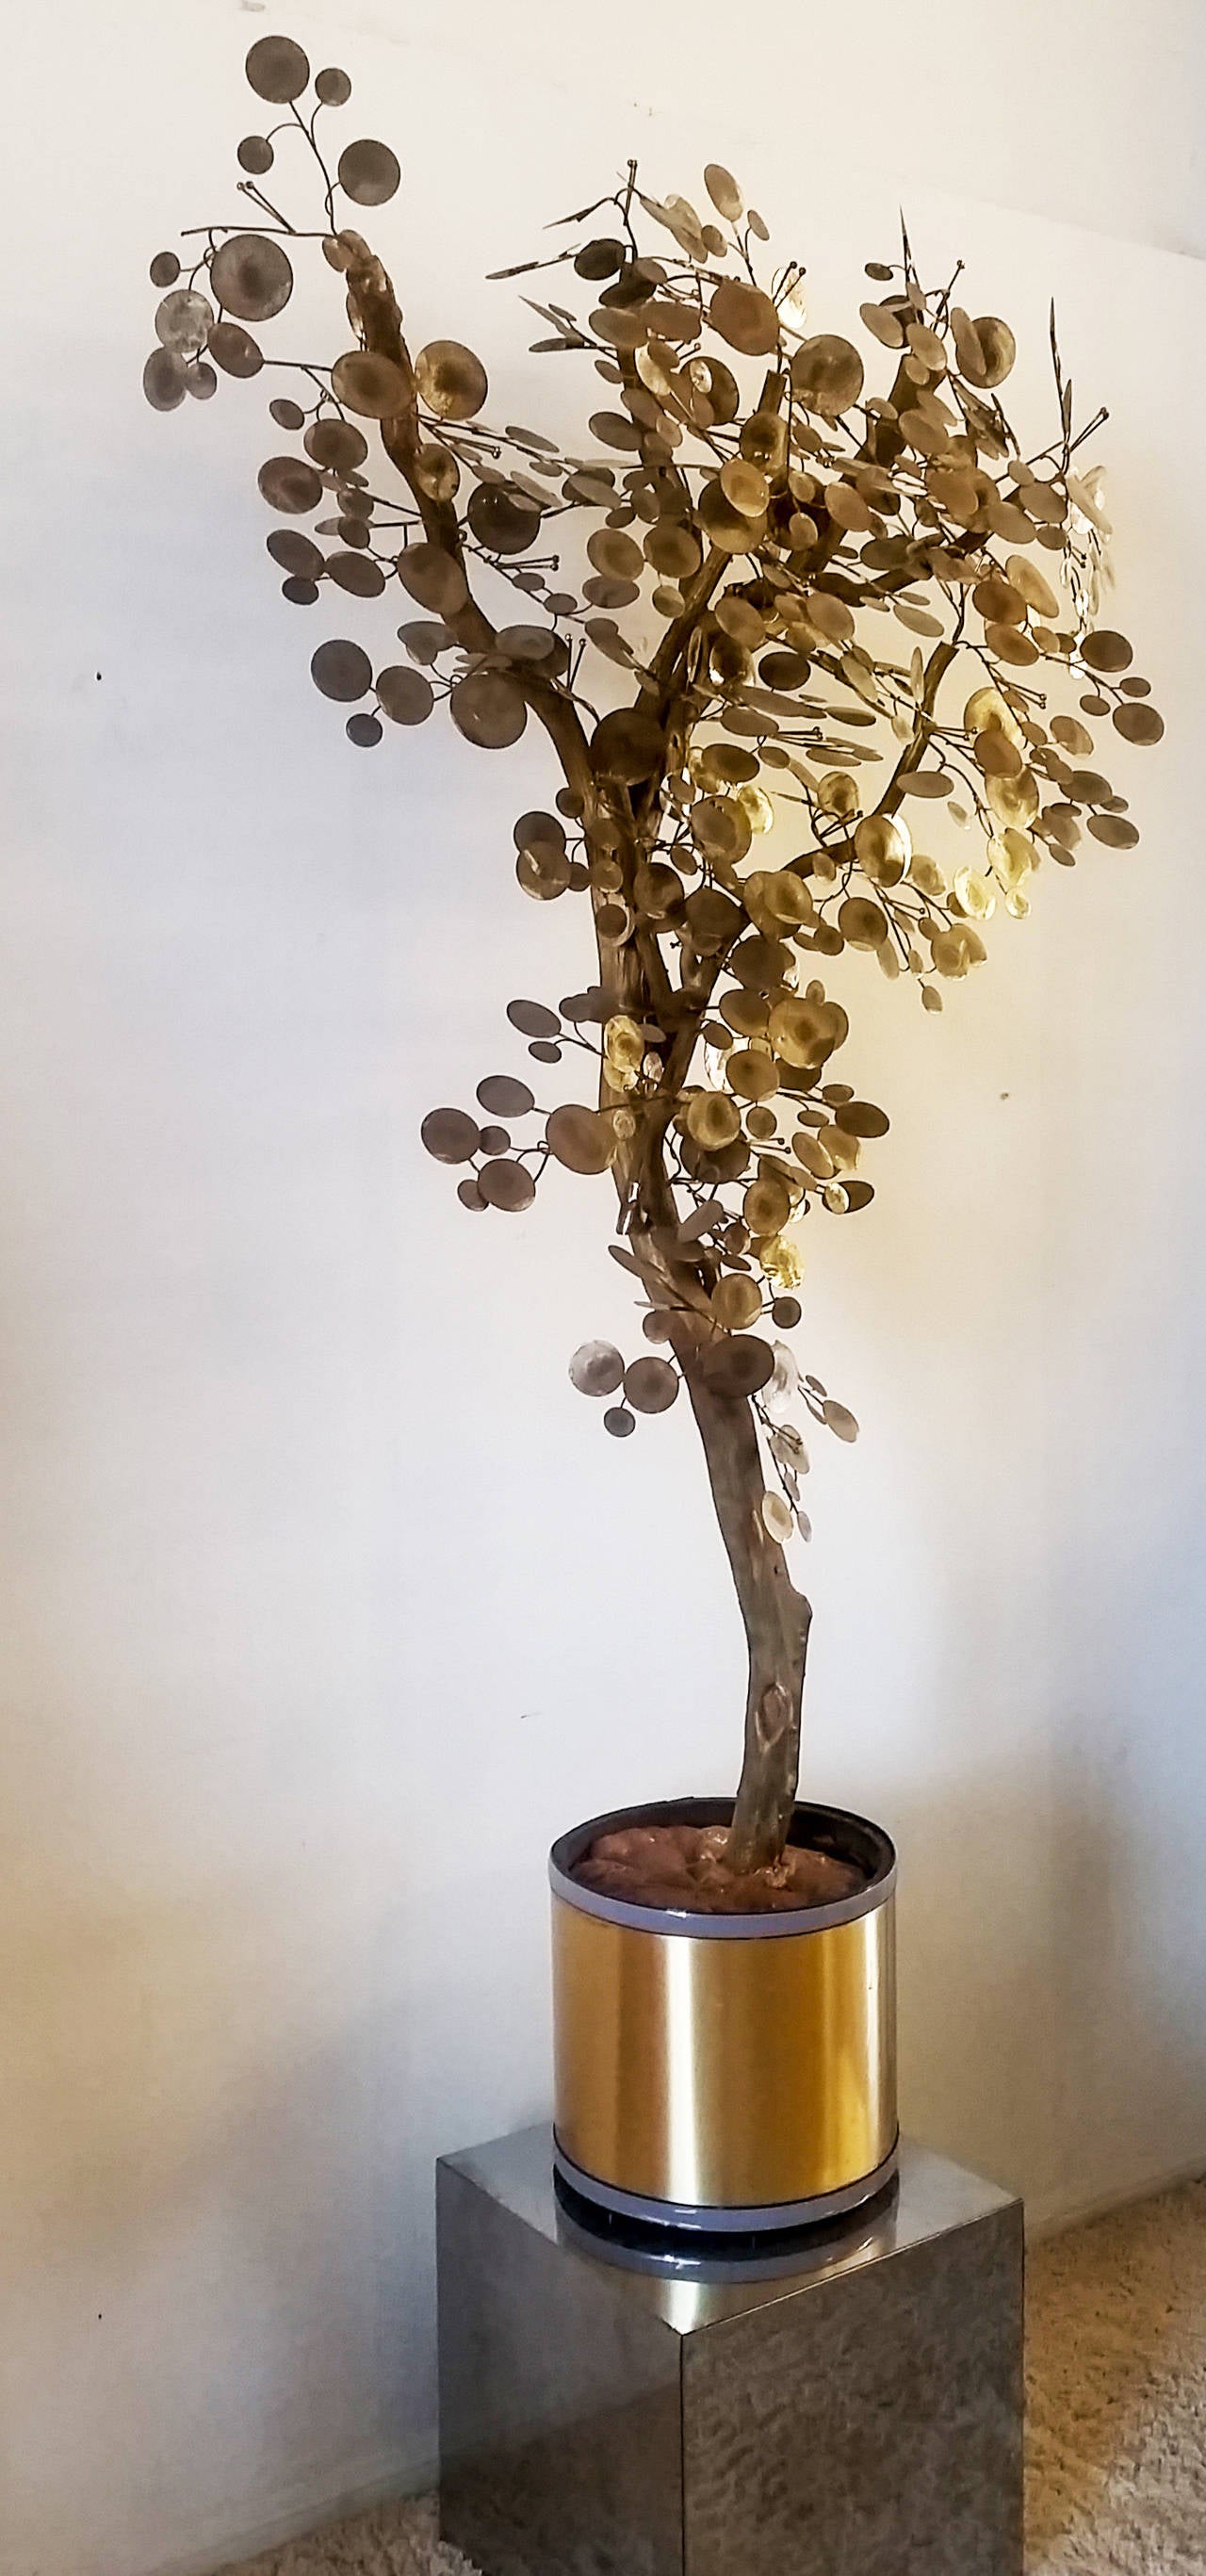 This life-sized, brass tree designed by Curtis Jere is truly stunning! A part of his popular raindrop series, this wooden and brass tree stands over 6' tall and is a chic, Hollywood Regency alternative to a standard ficus tree.